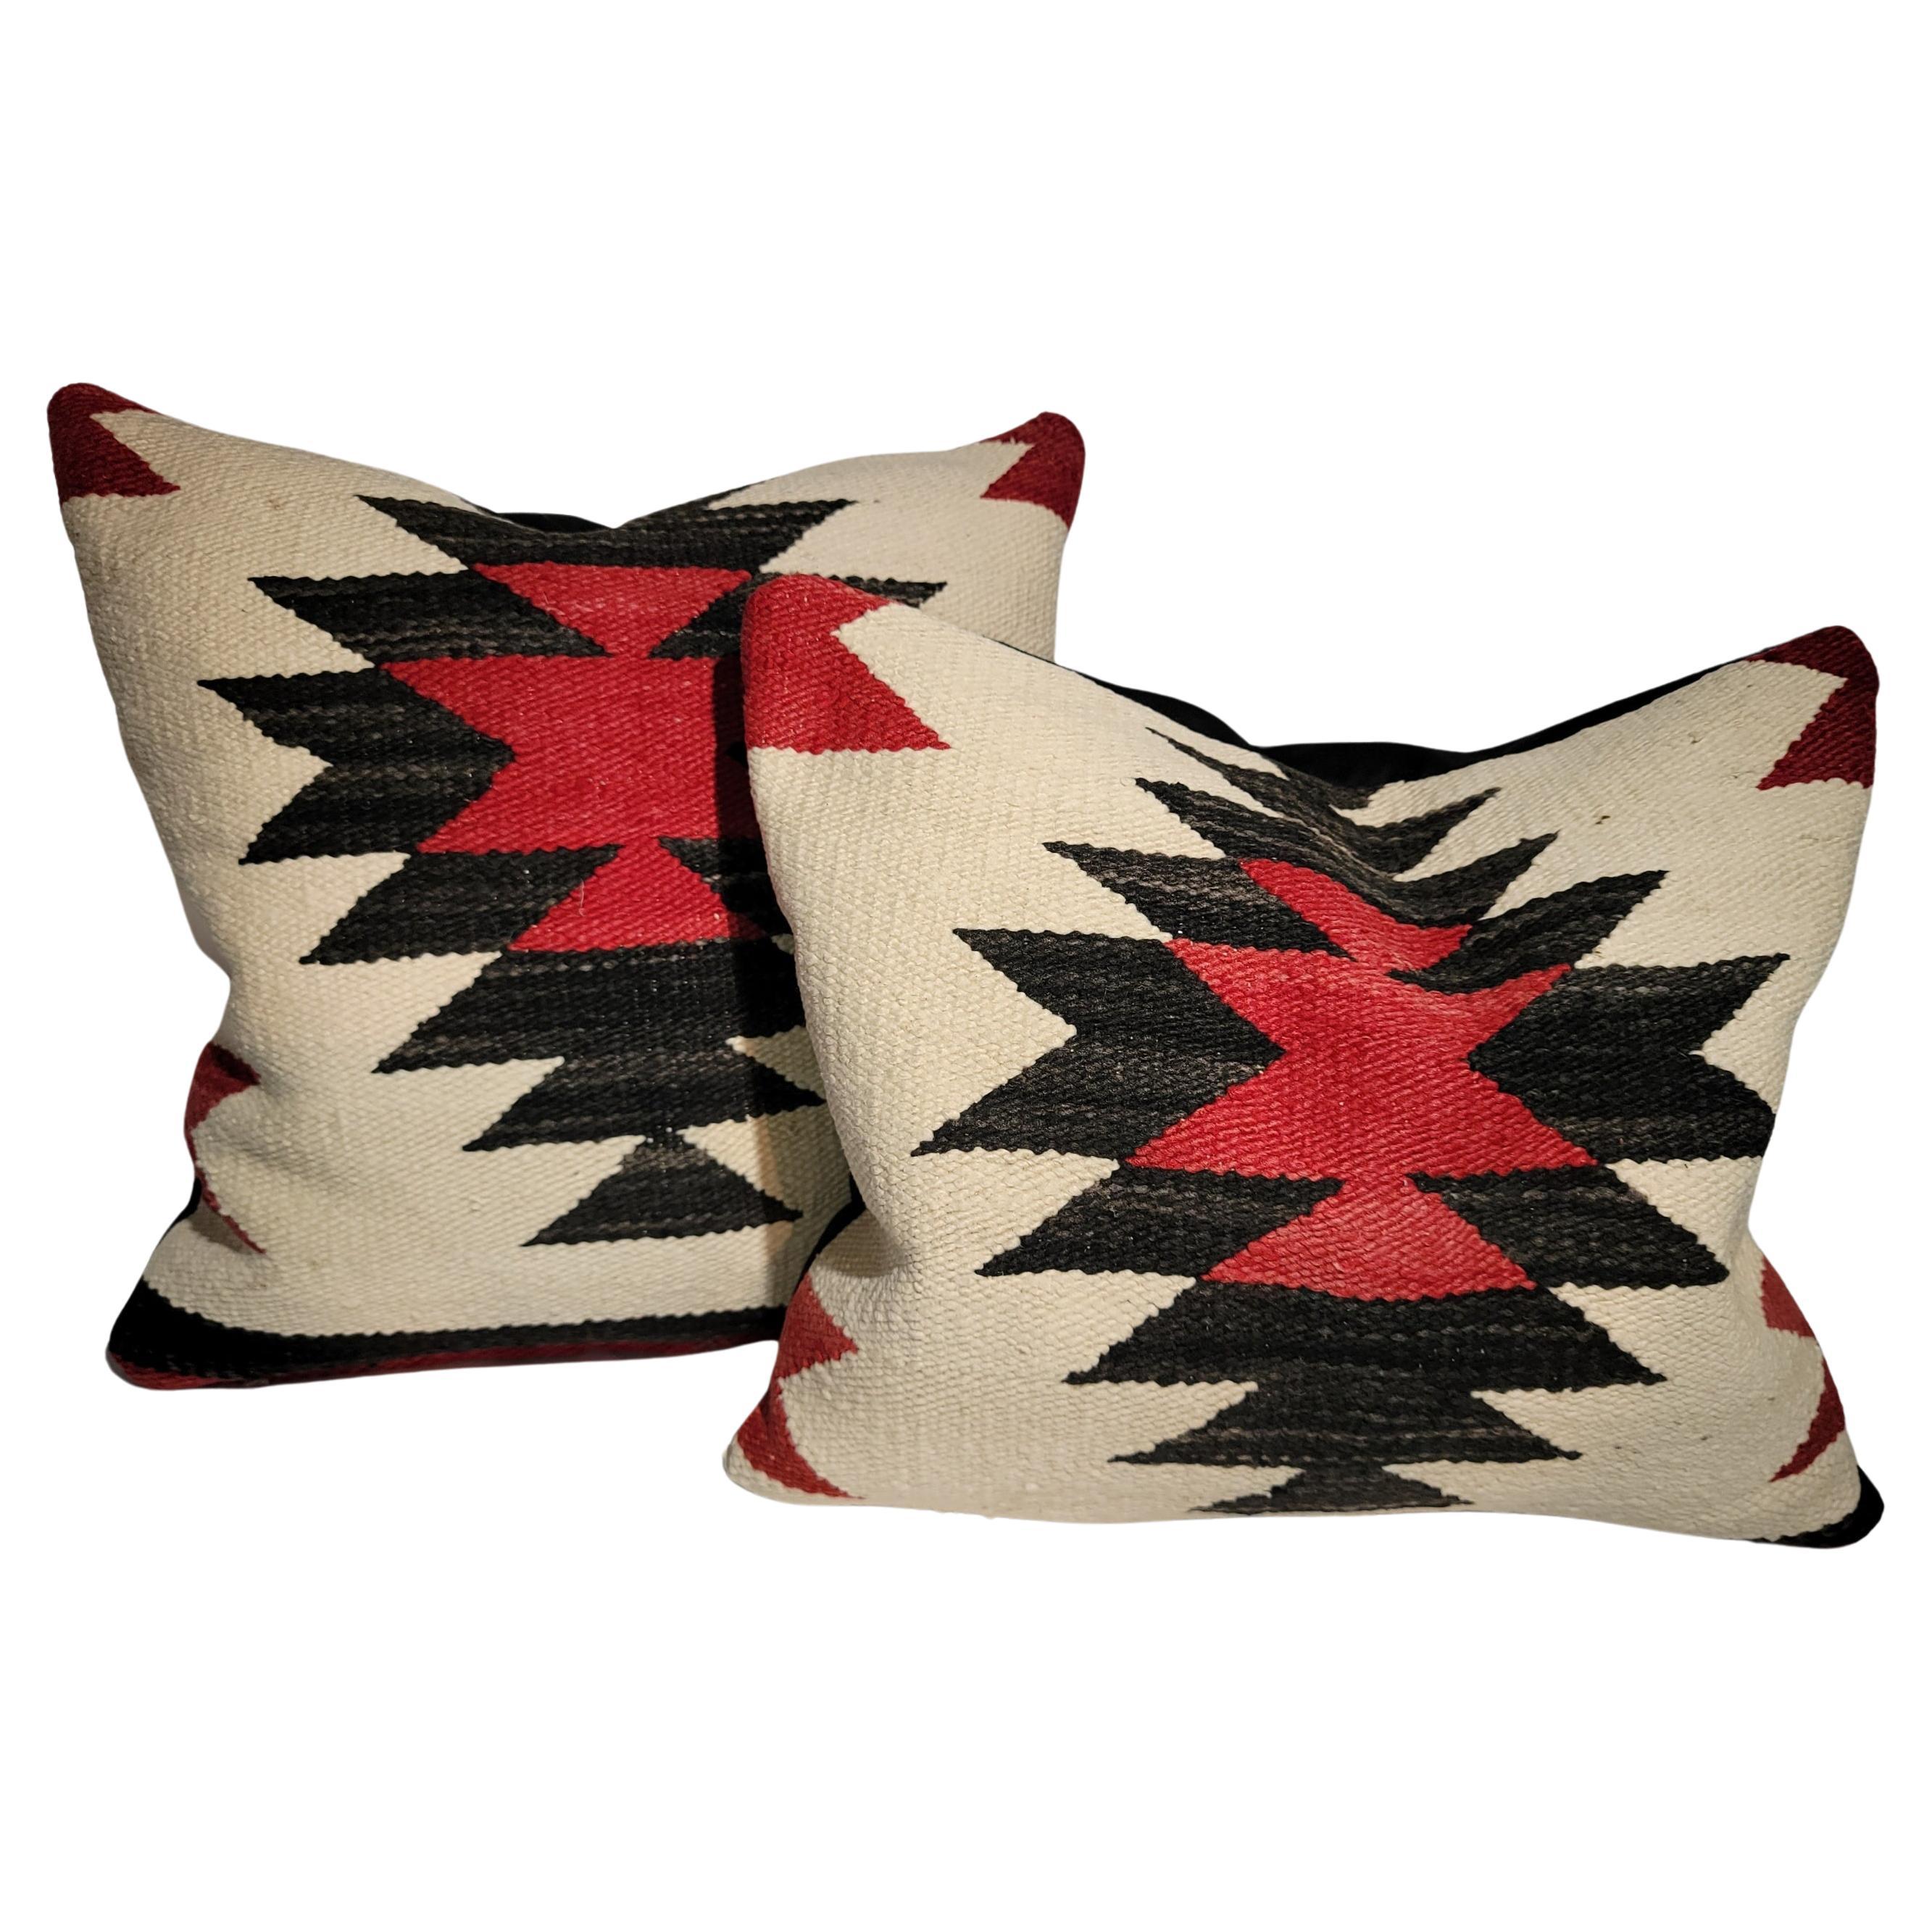 Navajo Indian Weaving Pillows-Pair For Sale